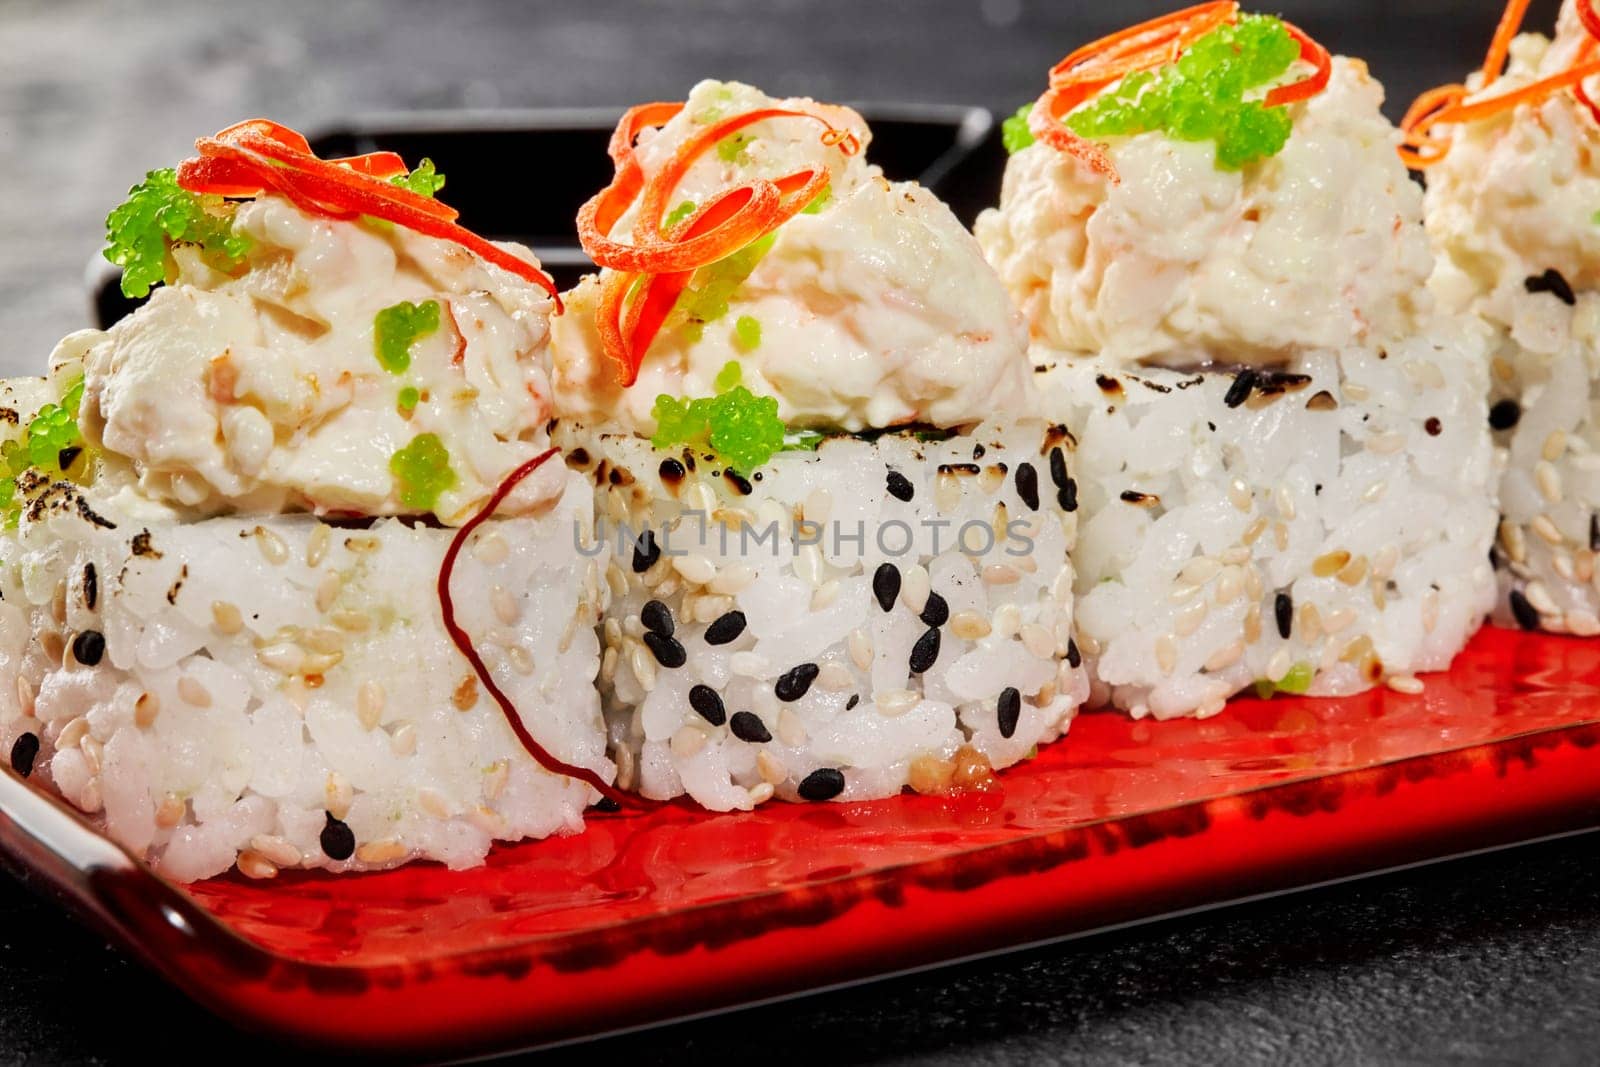 Macro shot of elegant sushi roll sprinkled with sesame seeds on ceramic red plate, highlighting creamy toppings with seafood garnished with green tobiko and vegetable shavings. Japanese style delicacy